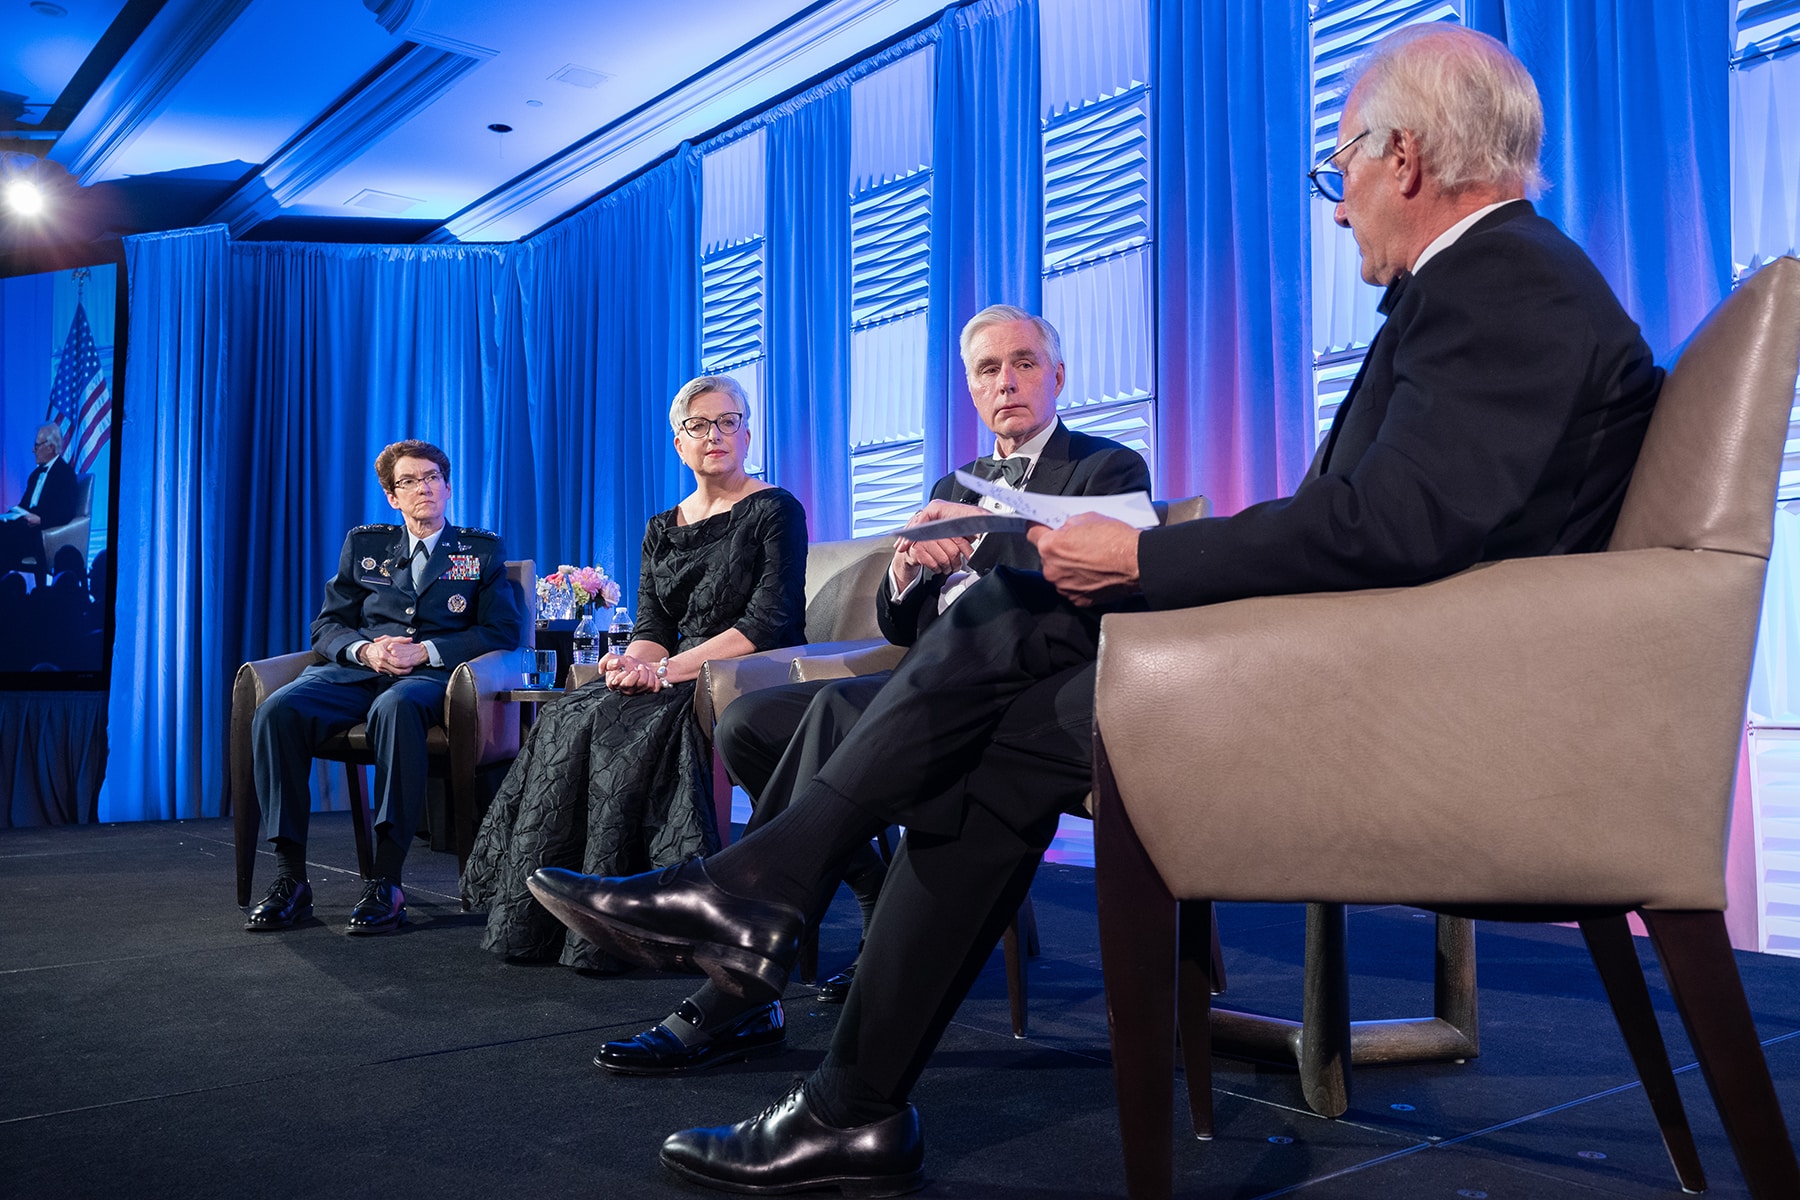 Fireside chat with honorees, 2022 Eisenhower Awards gala